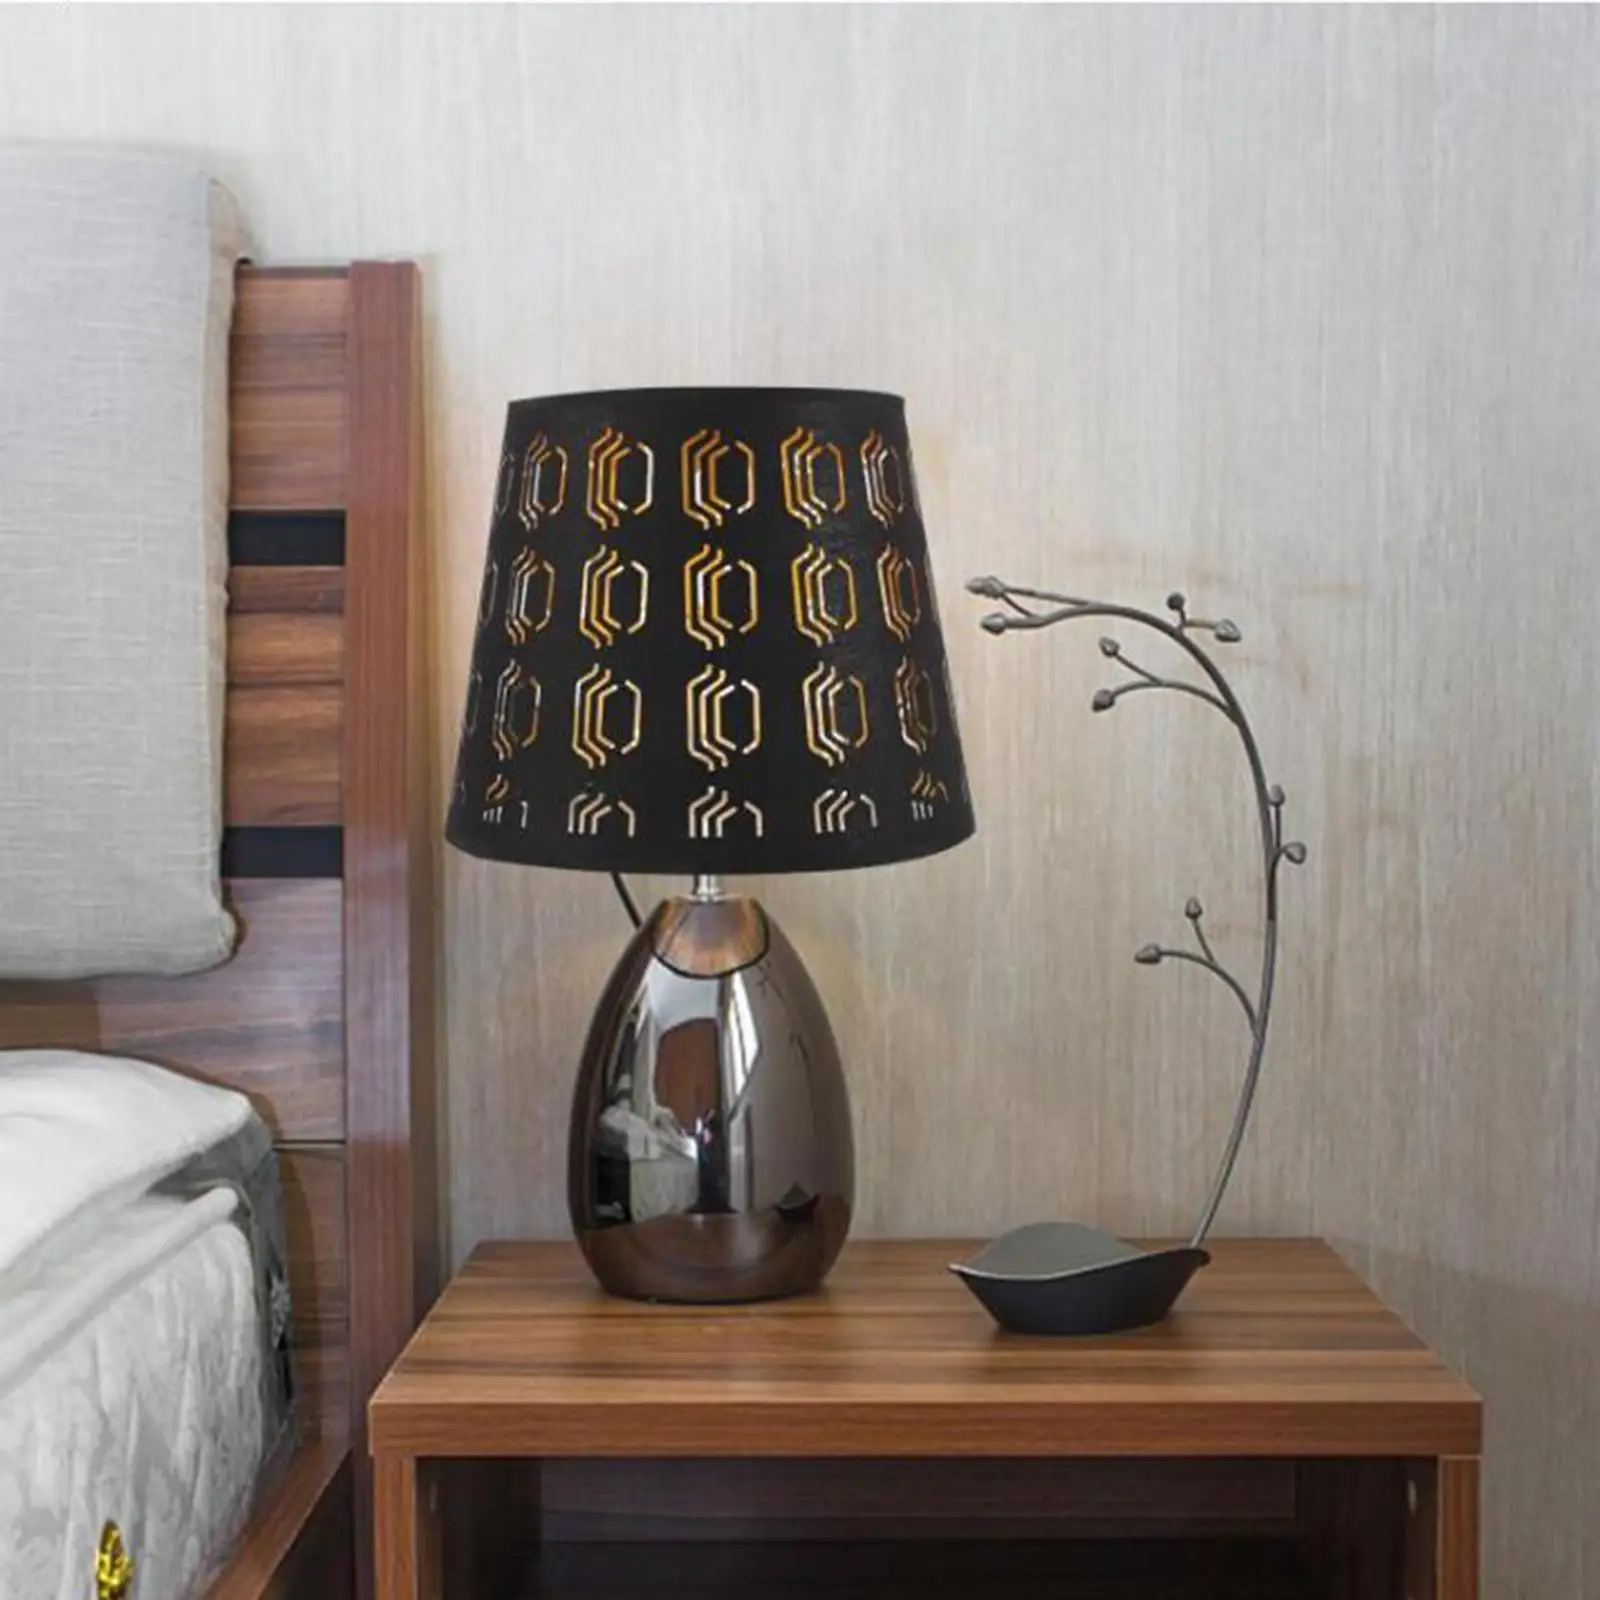 Table Lamp Shade Pendant Light Lampshade Decorative Drum Shade Hanging Light Cover Lighting Fixtures for Dining Room Kitchen